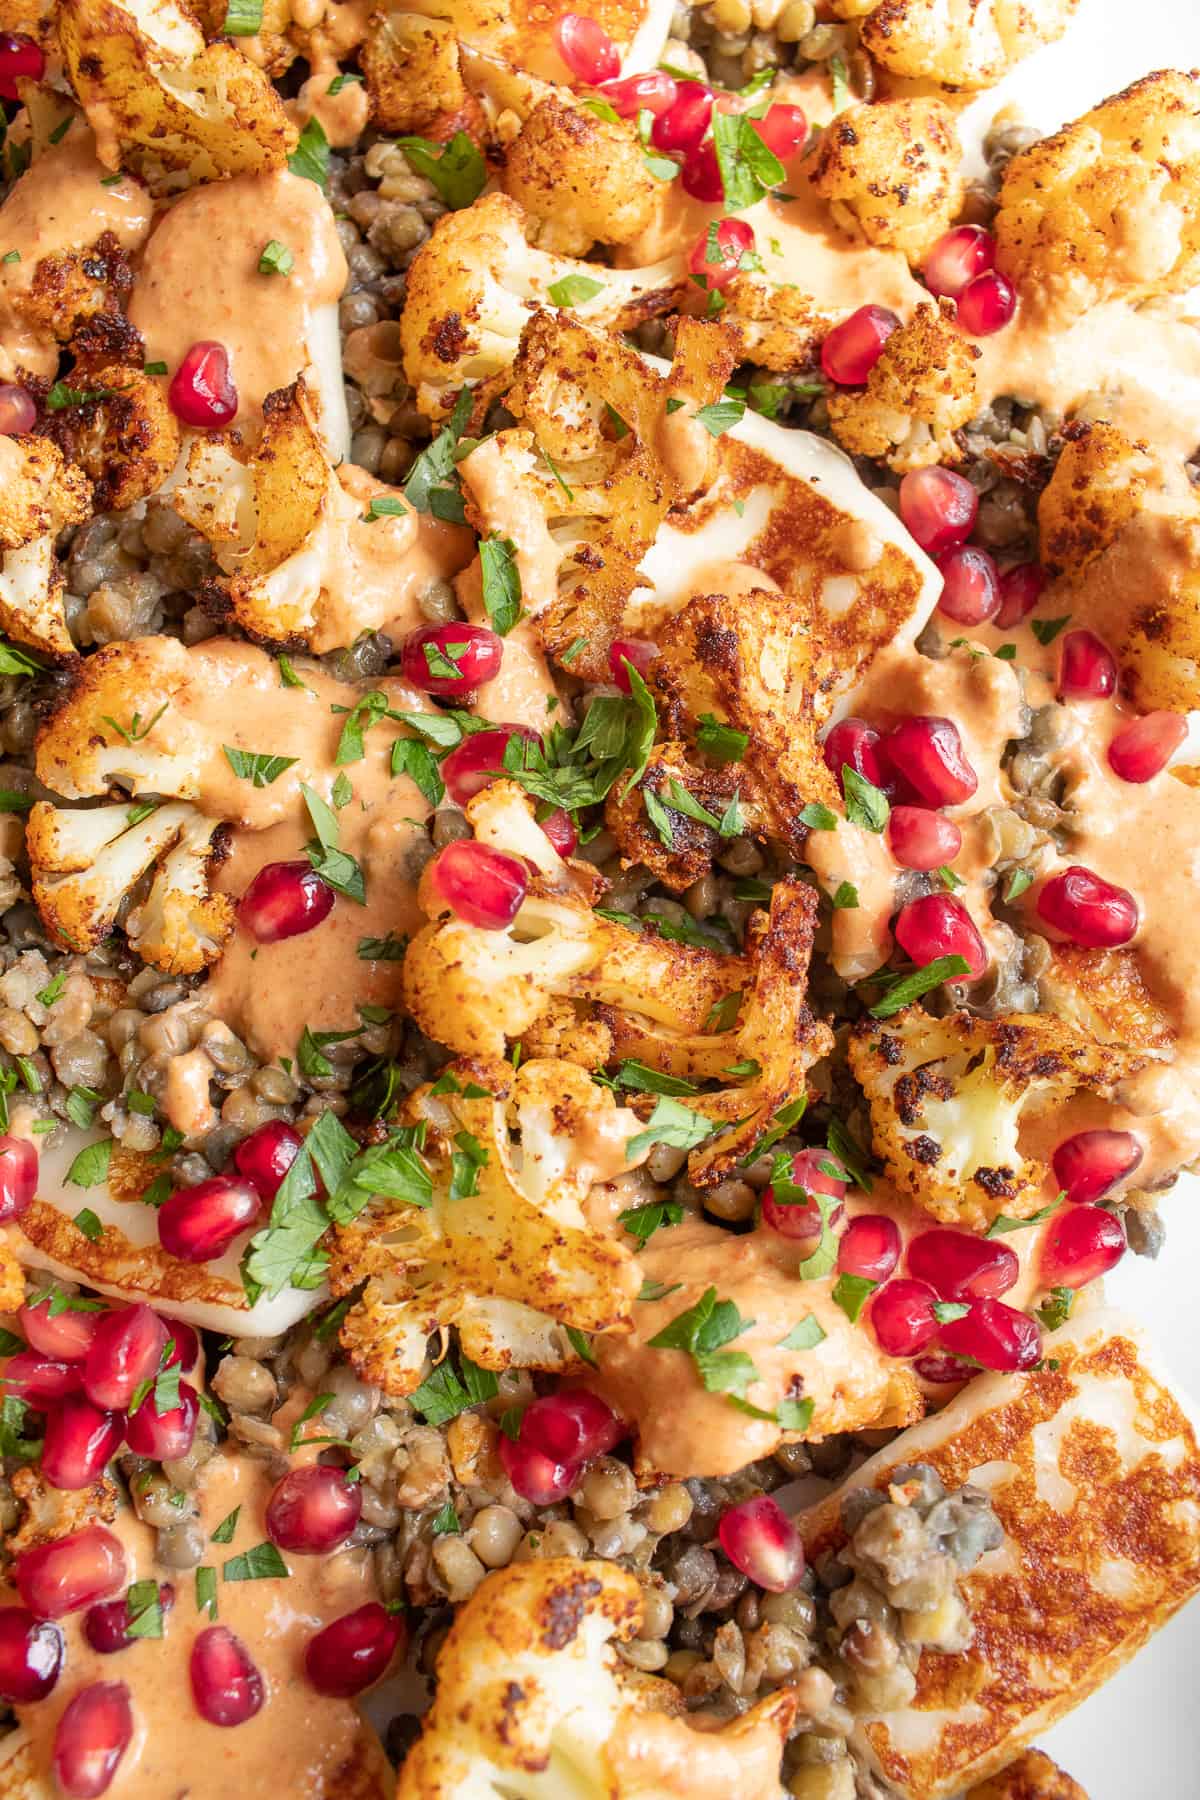 A detailed image of the salad with lentils, fried halloumi, roasted cauliflower, chopped parsley, an orange dressing, and red pomegranate arils.